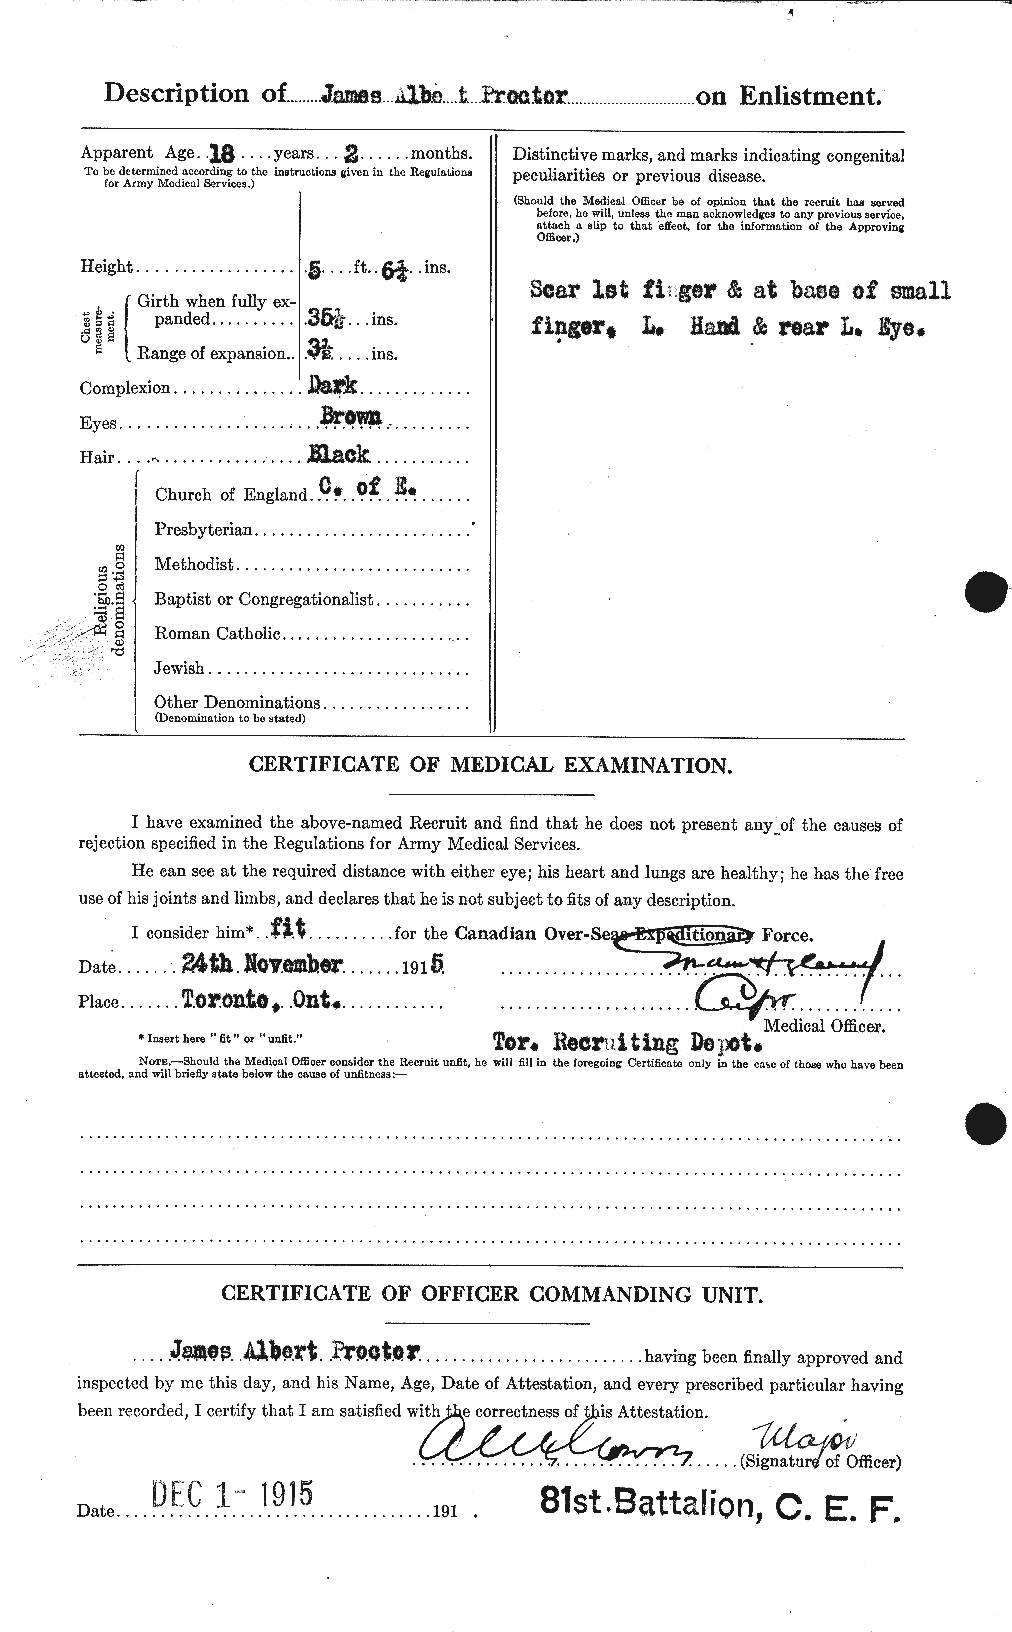 Personnel Records of the First World War - CEF 589195b